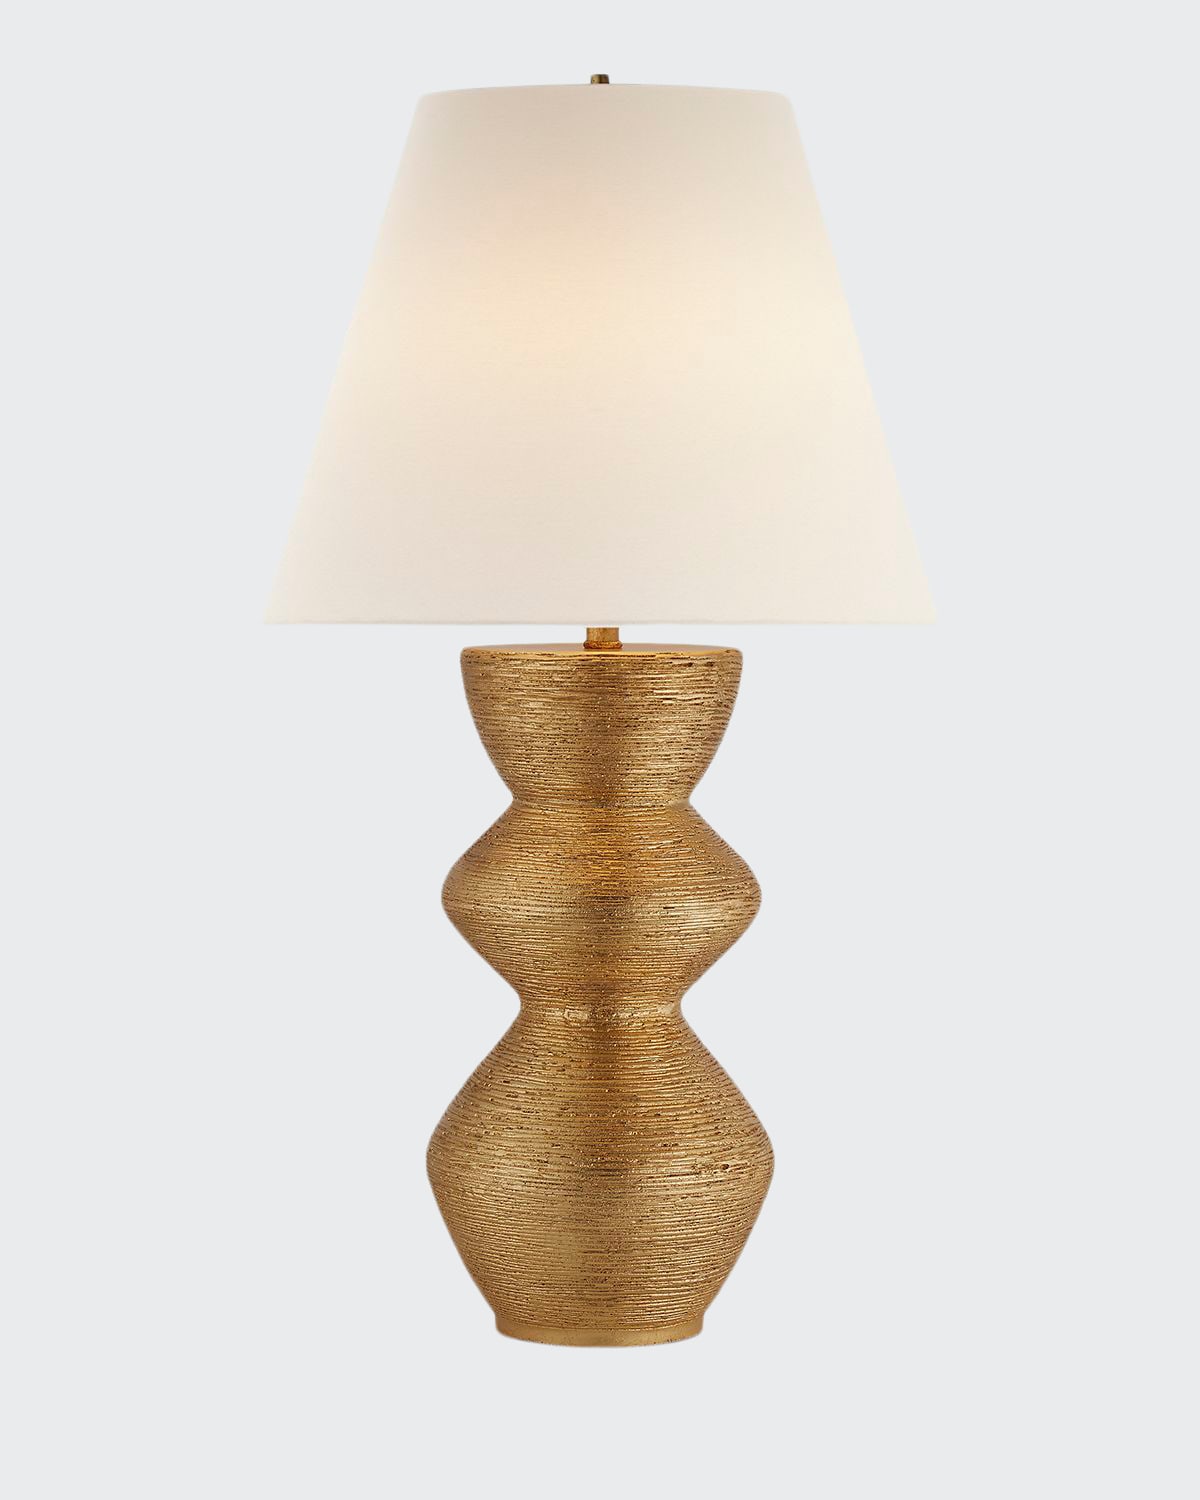 Kelly Wearstler For Visual Comfort Signature Utopia Table Lamp In Gold